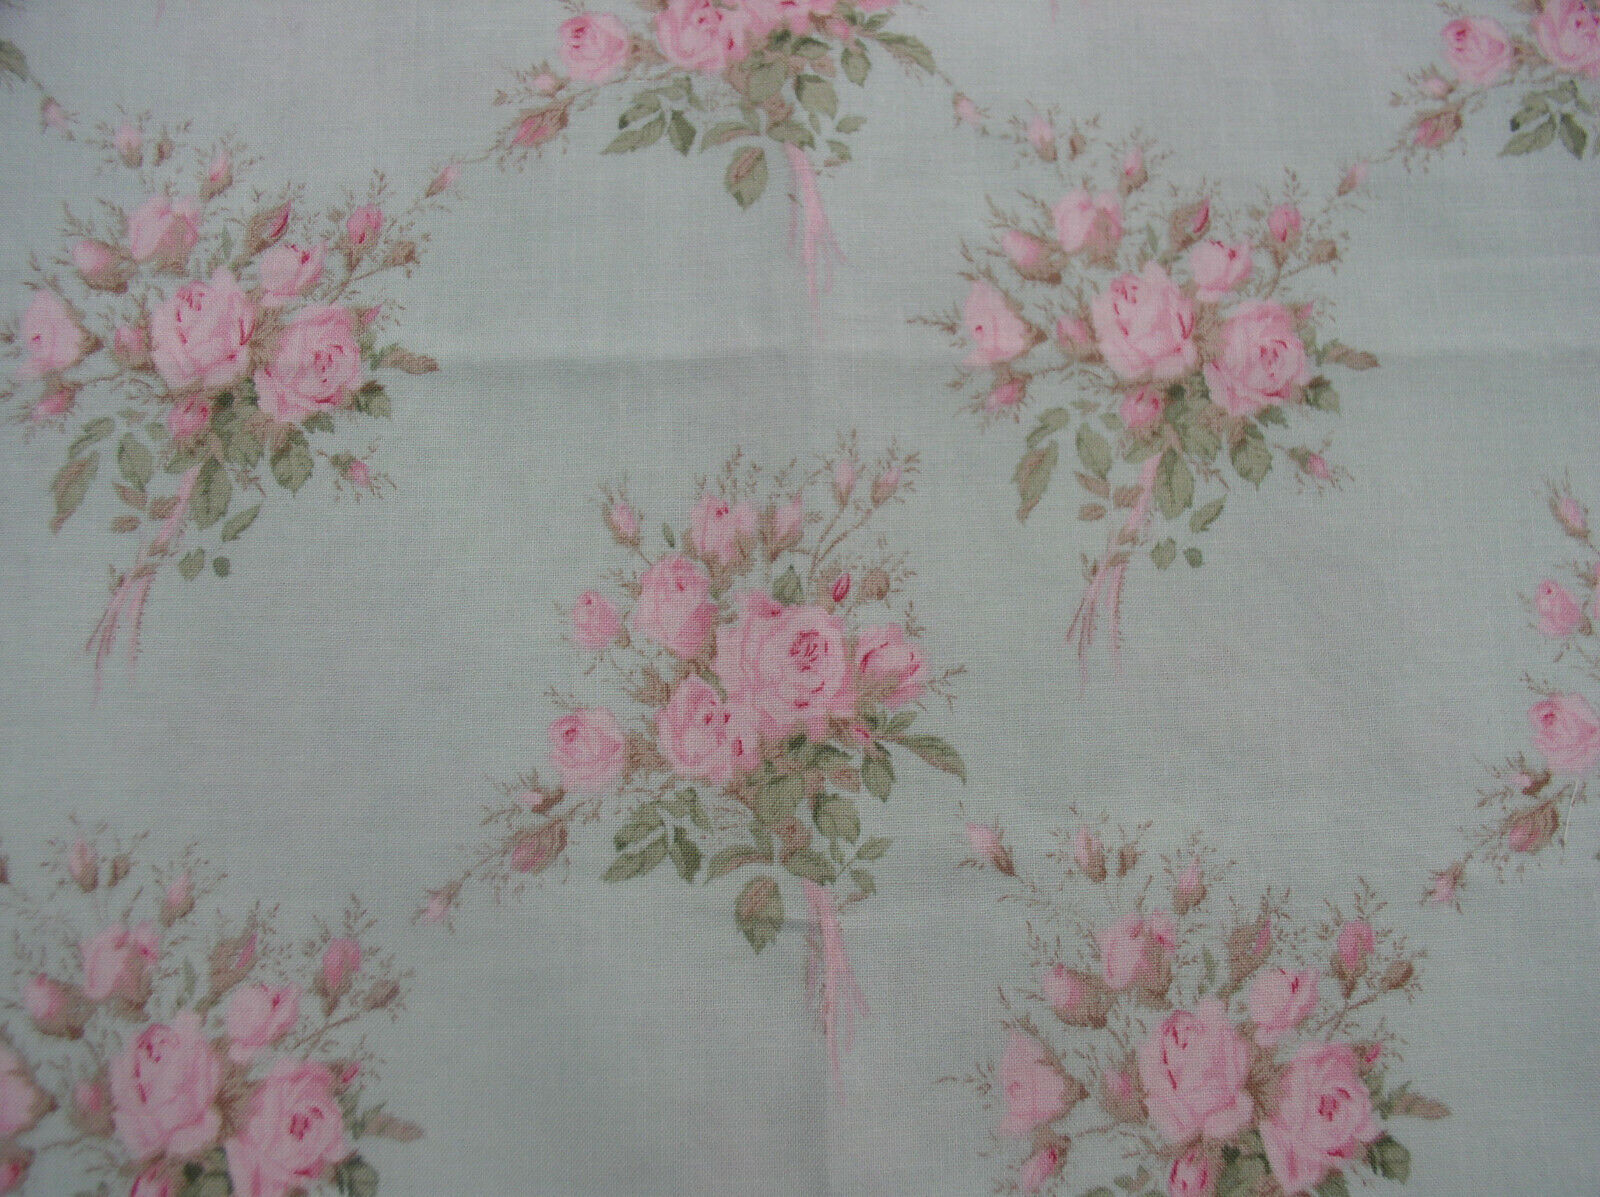 Yuwa Vintage Inspired Pink Rose Bouquets on Aqua  Cotton Fabric 1 yd. 